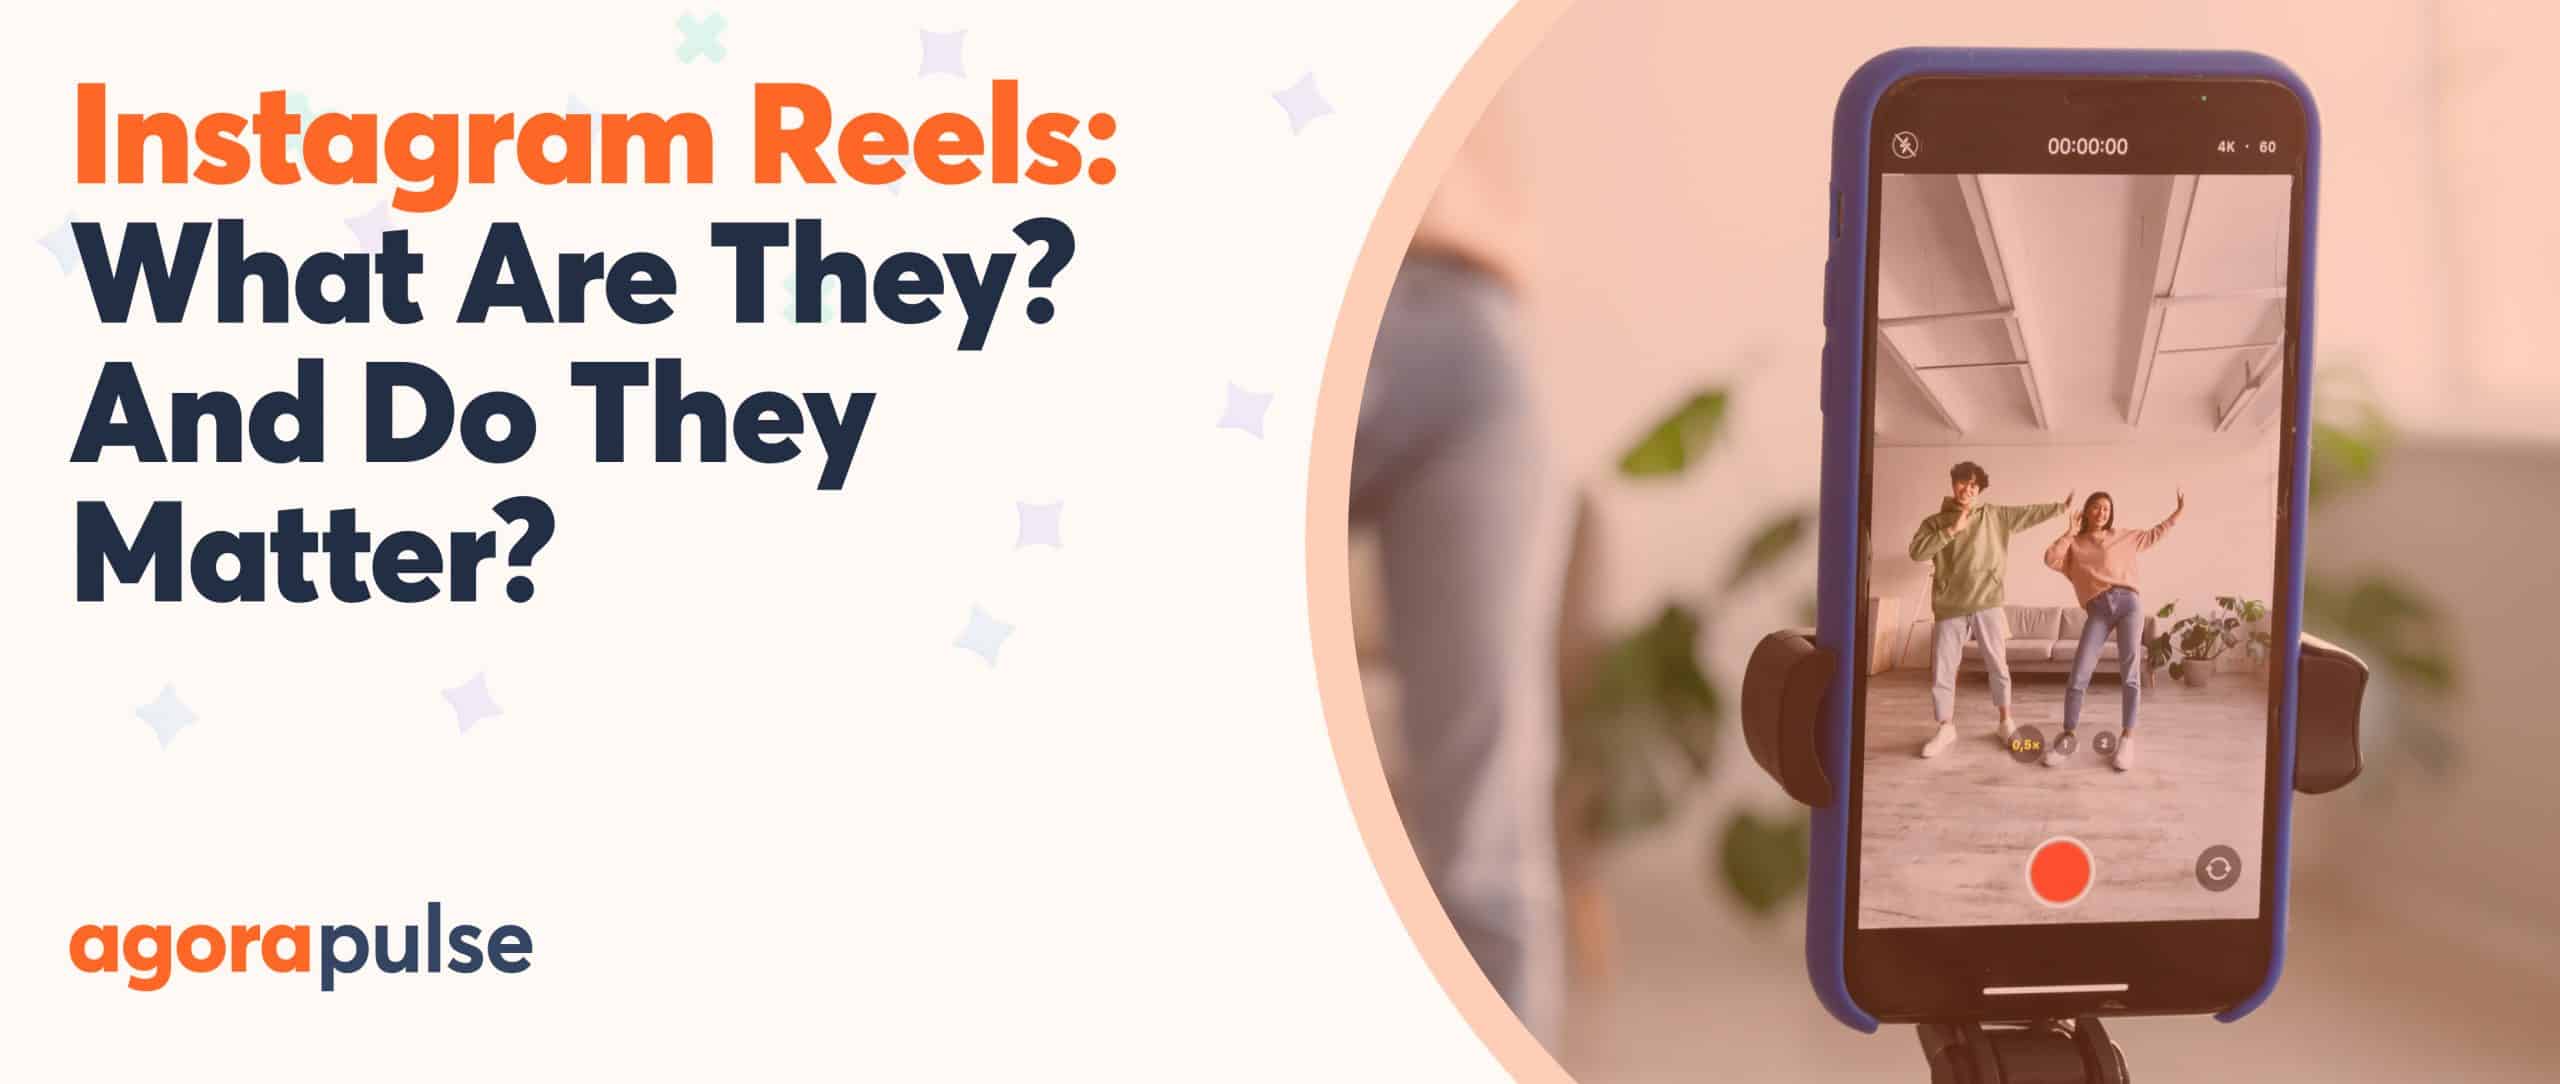 Instagram Reels: What Are They? And Do They Matter?